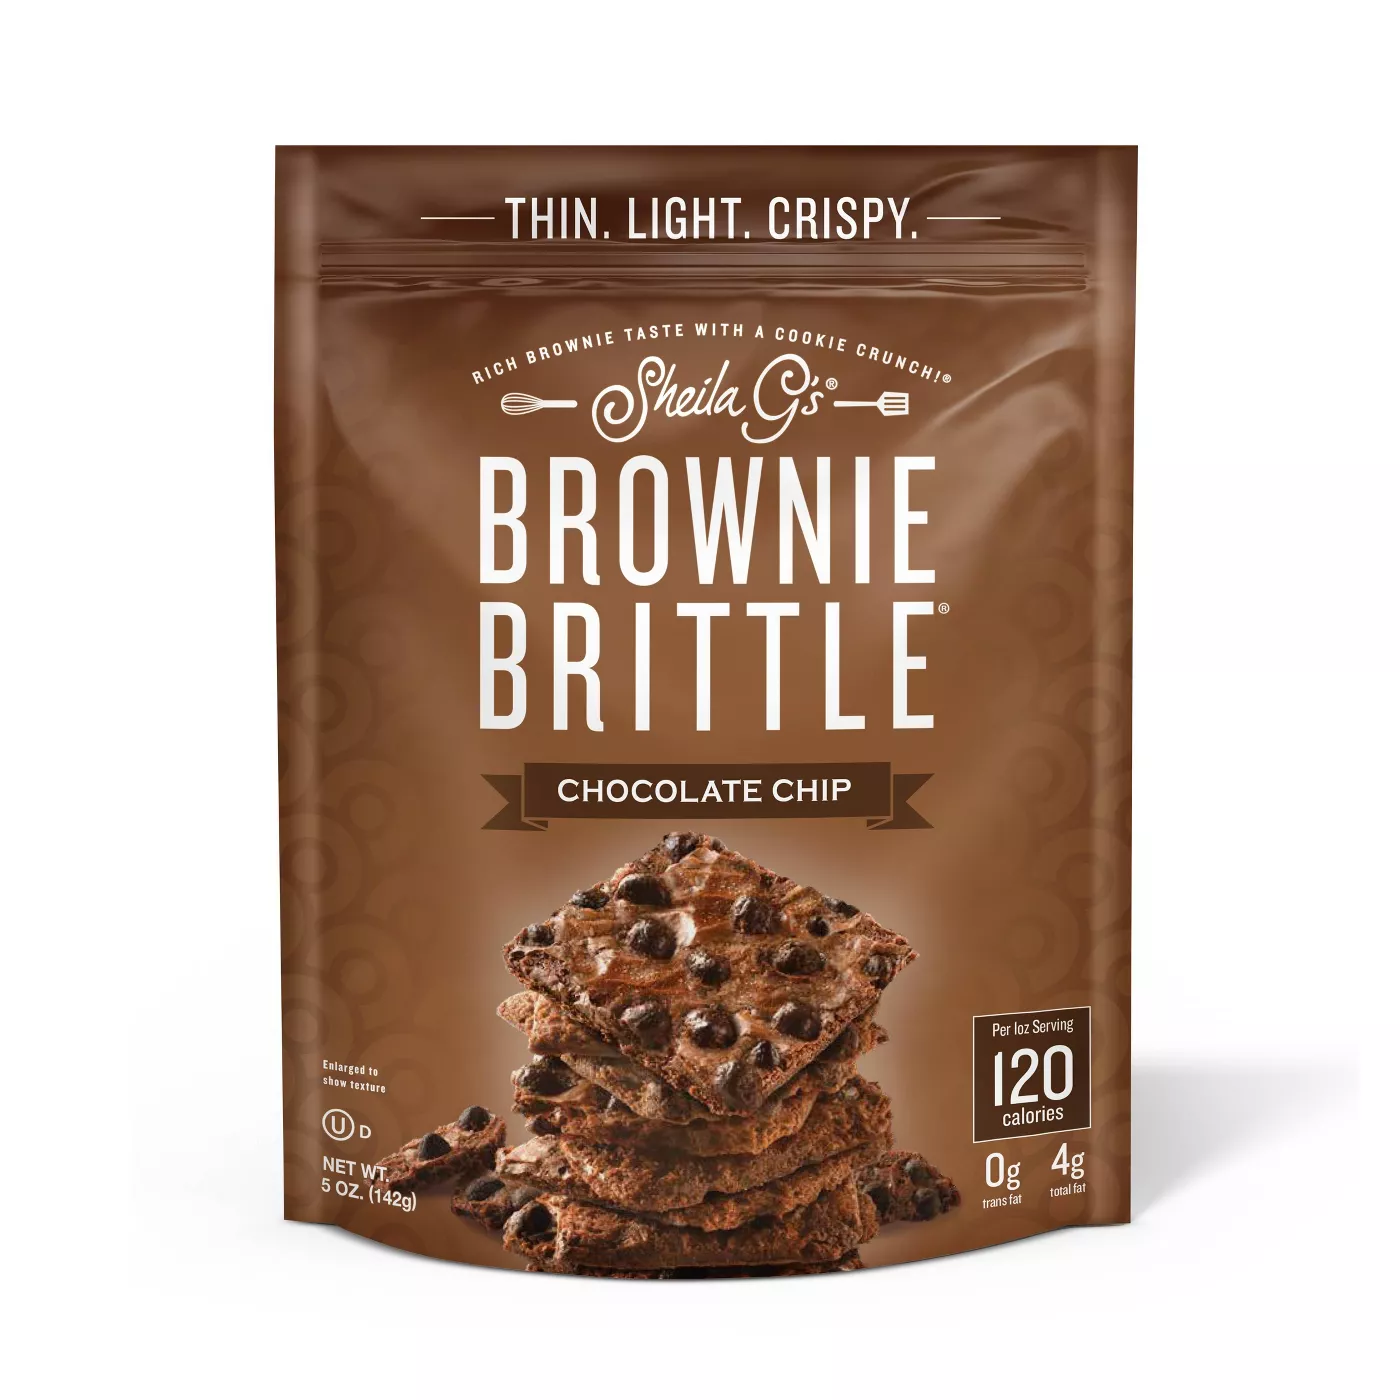 Sheila G's Brownie Brittle, Chocolate Chip, Thin & Crunchy Cookies - 5oz - image 1 of 6